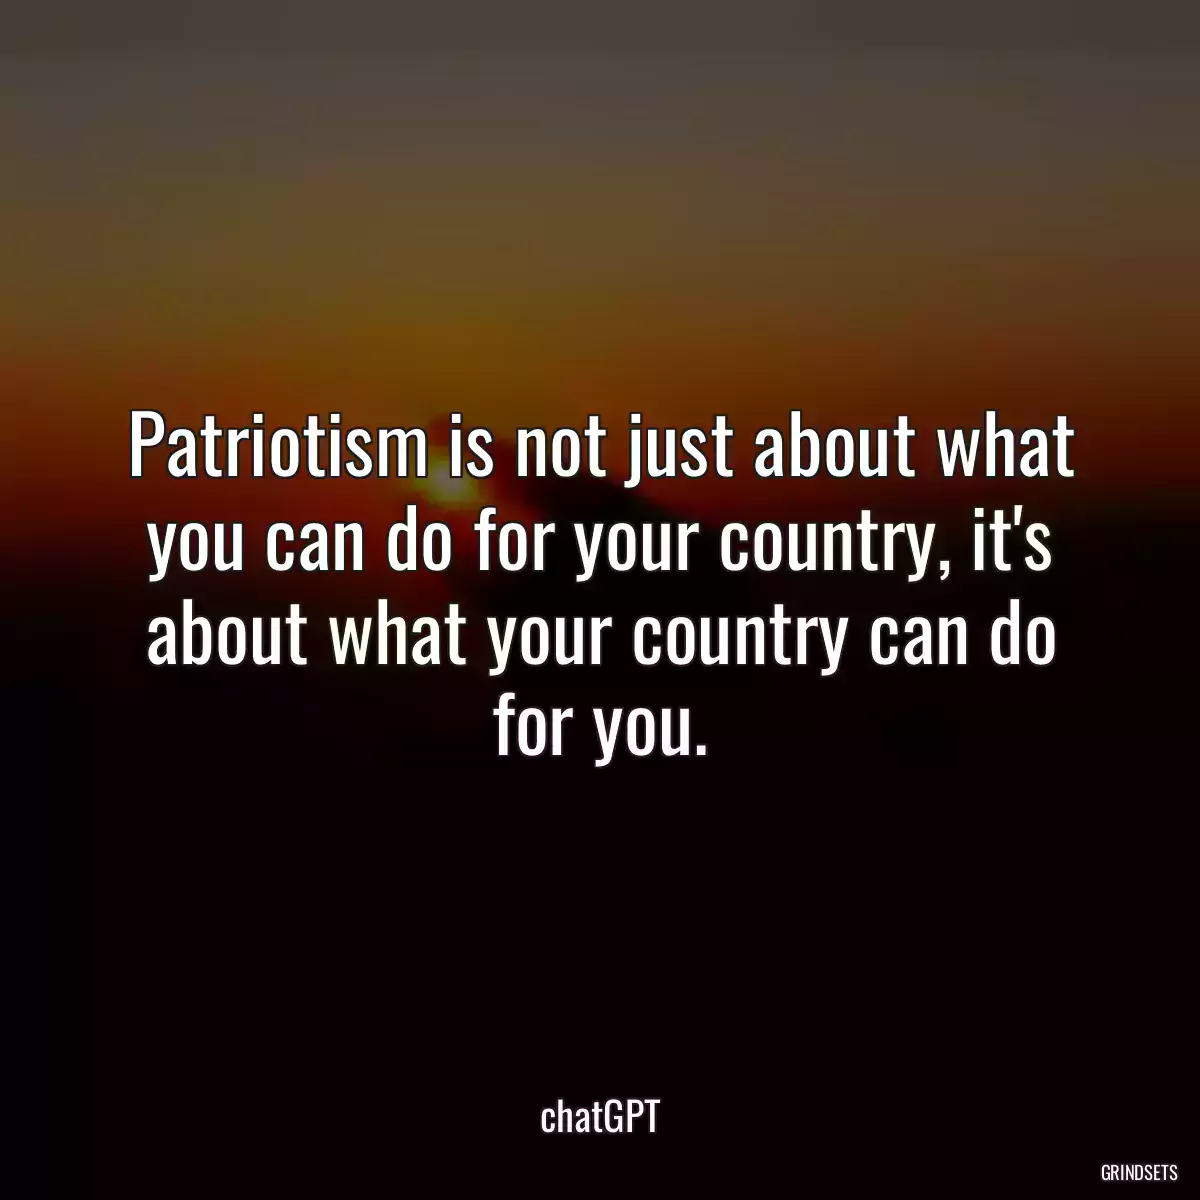 Patriotism is not just about what you can do for your country, it\'s about what your country can do for you.